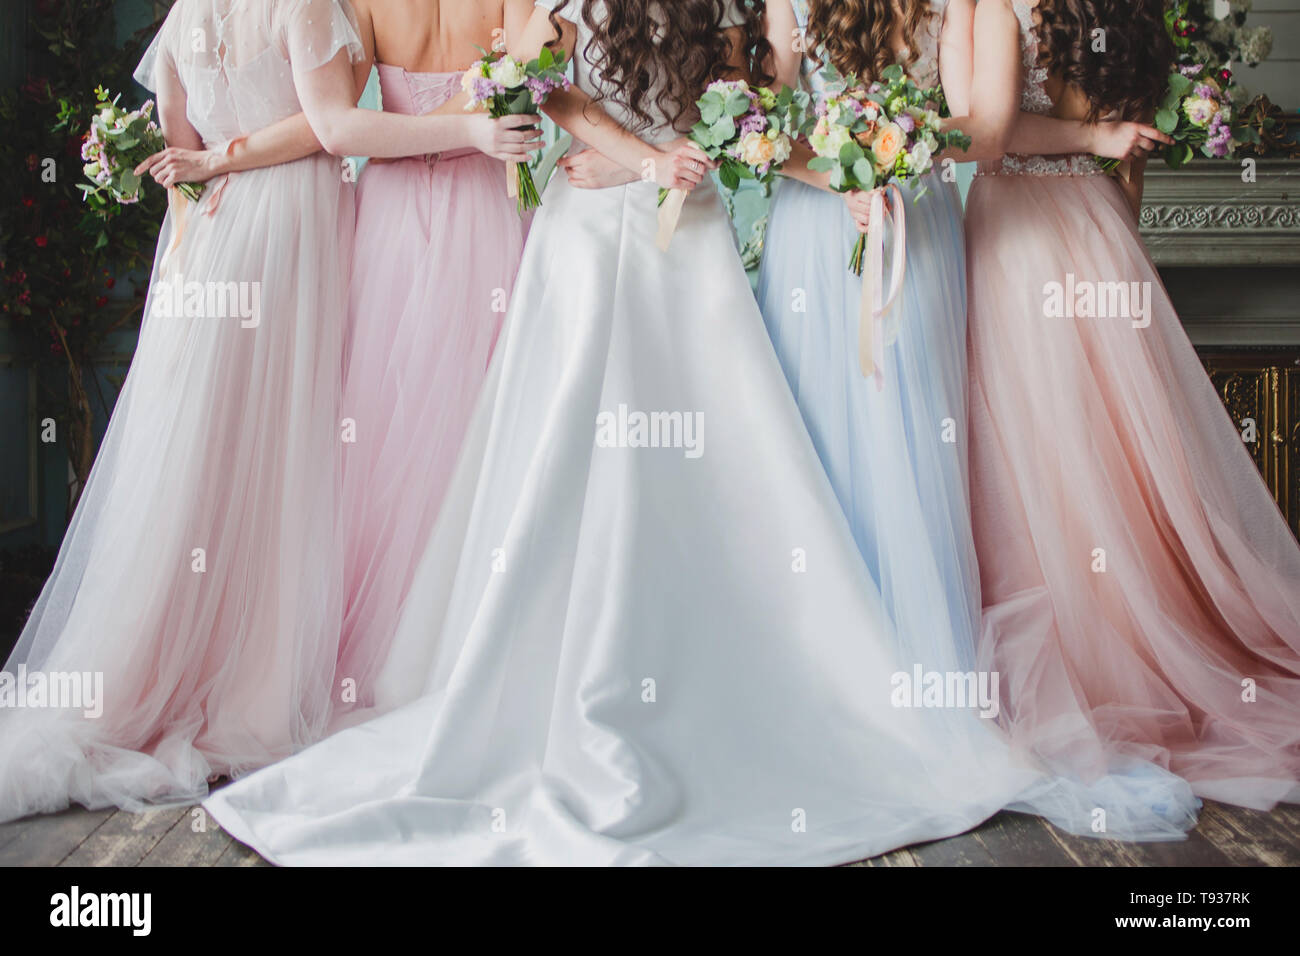 young ladies dresses for wedding